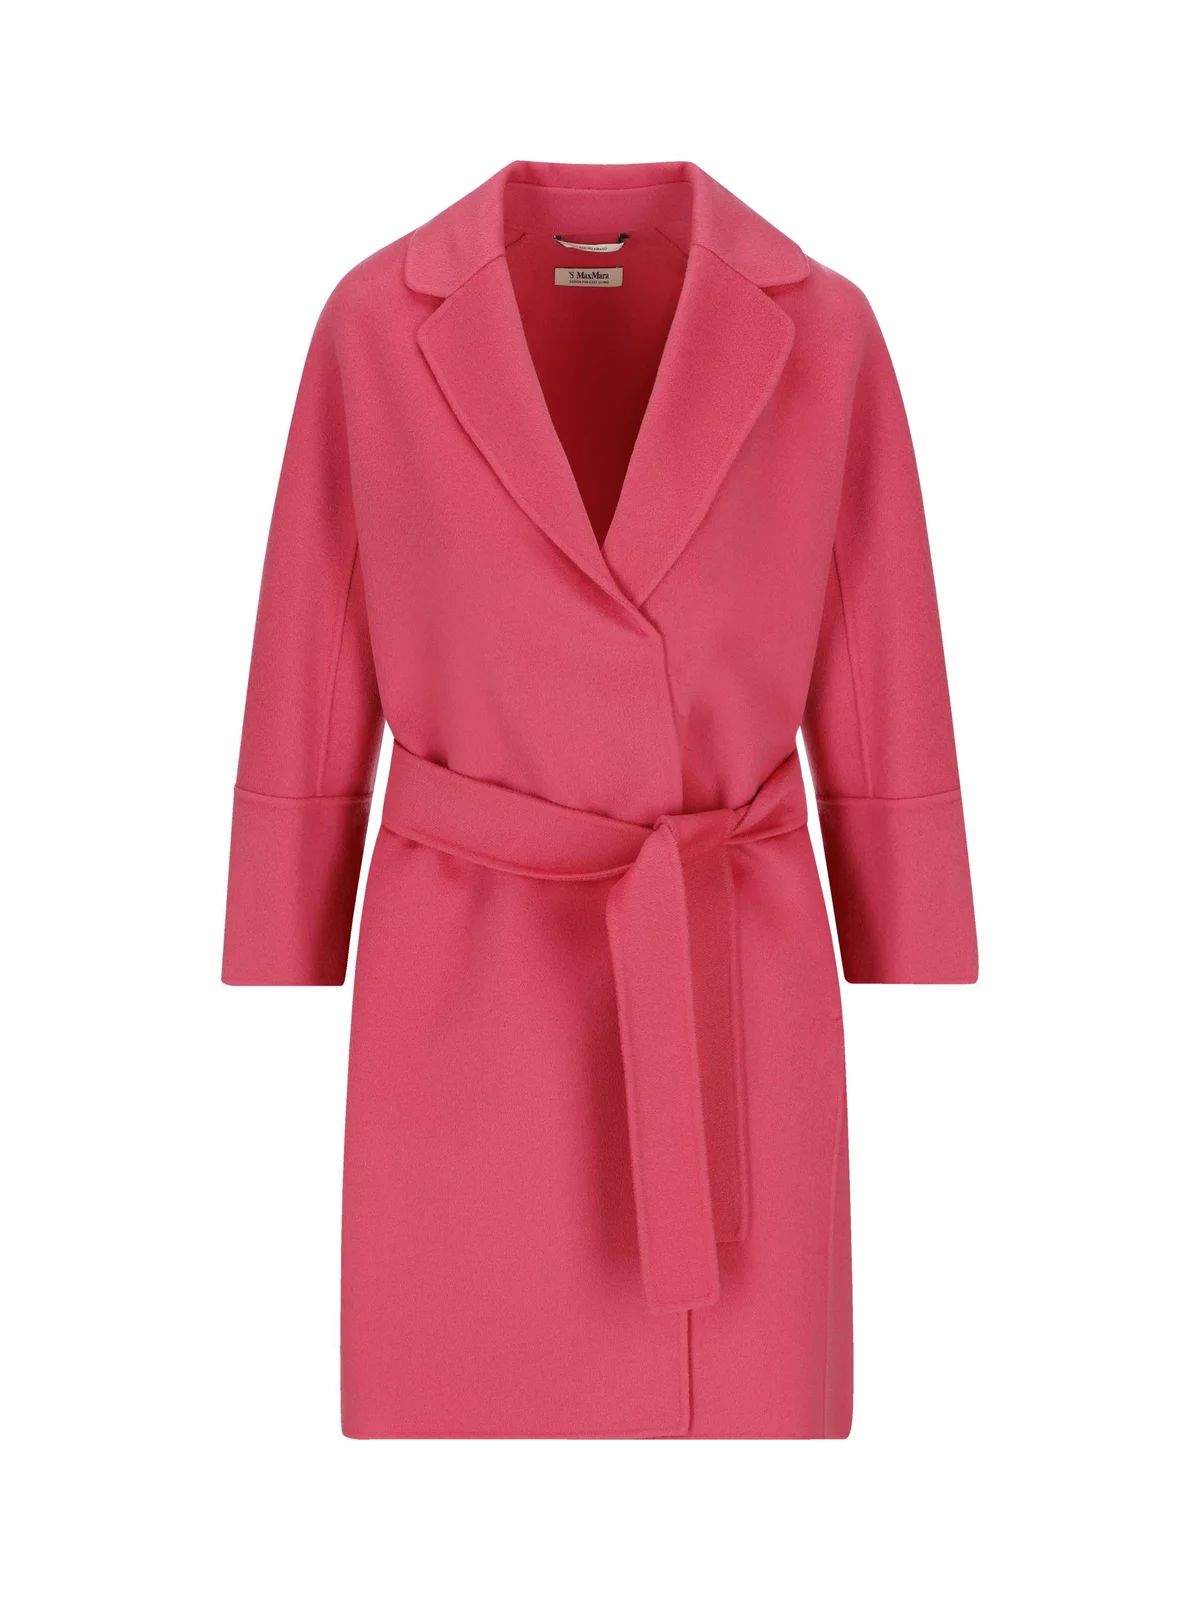 'S Max Mara Long Sleeved Belted Coat | Cettire Global